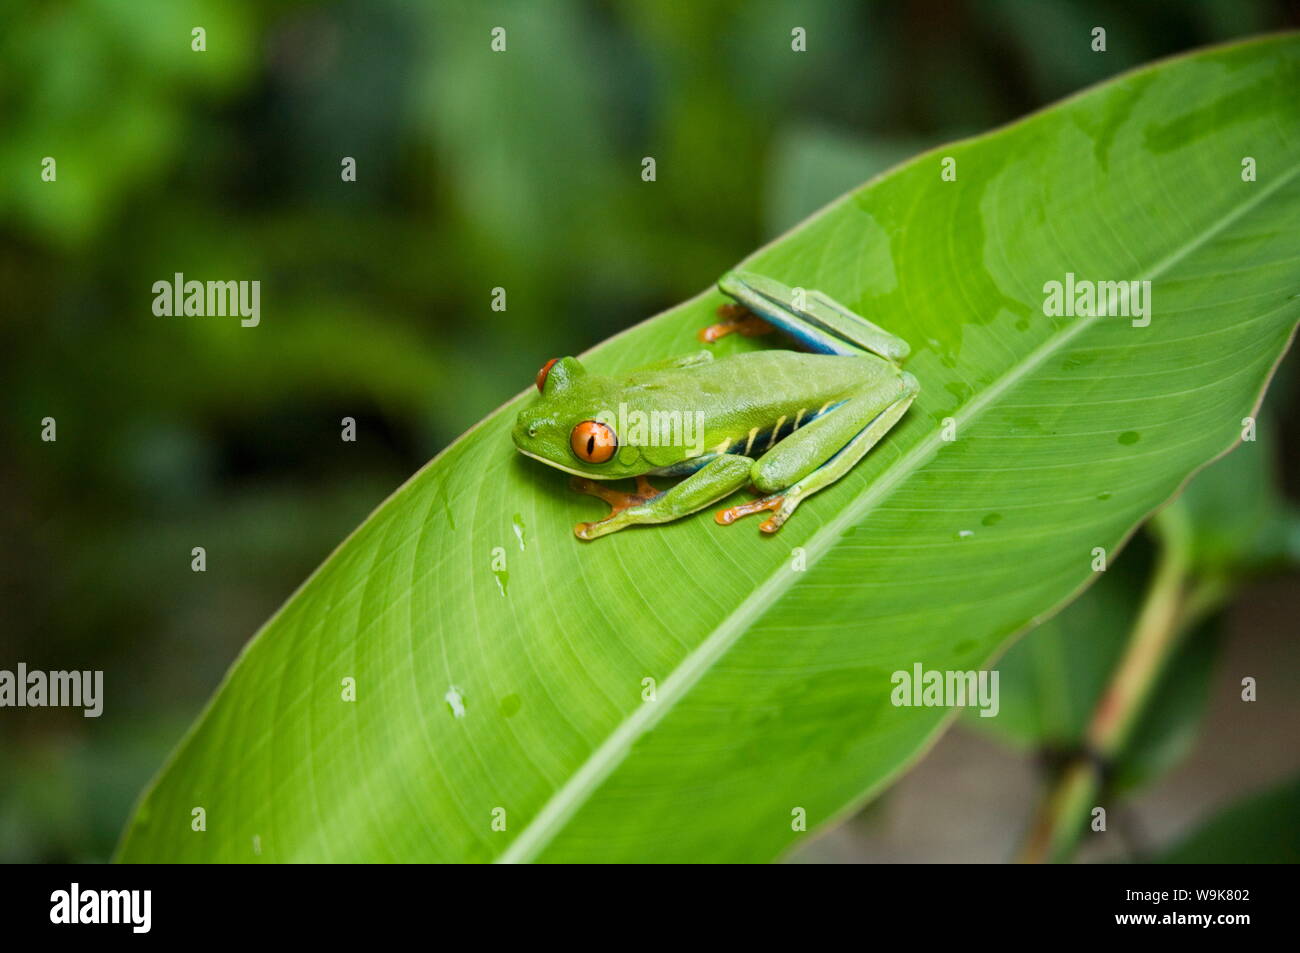 Red eyed tree frog, Parc National de Tortuguero, Costa Rica Banque D'Images